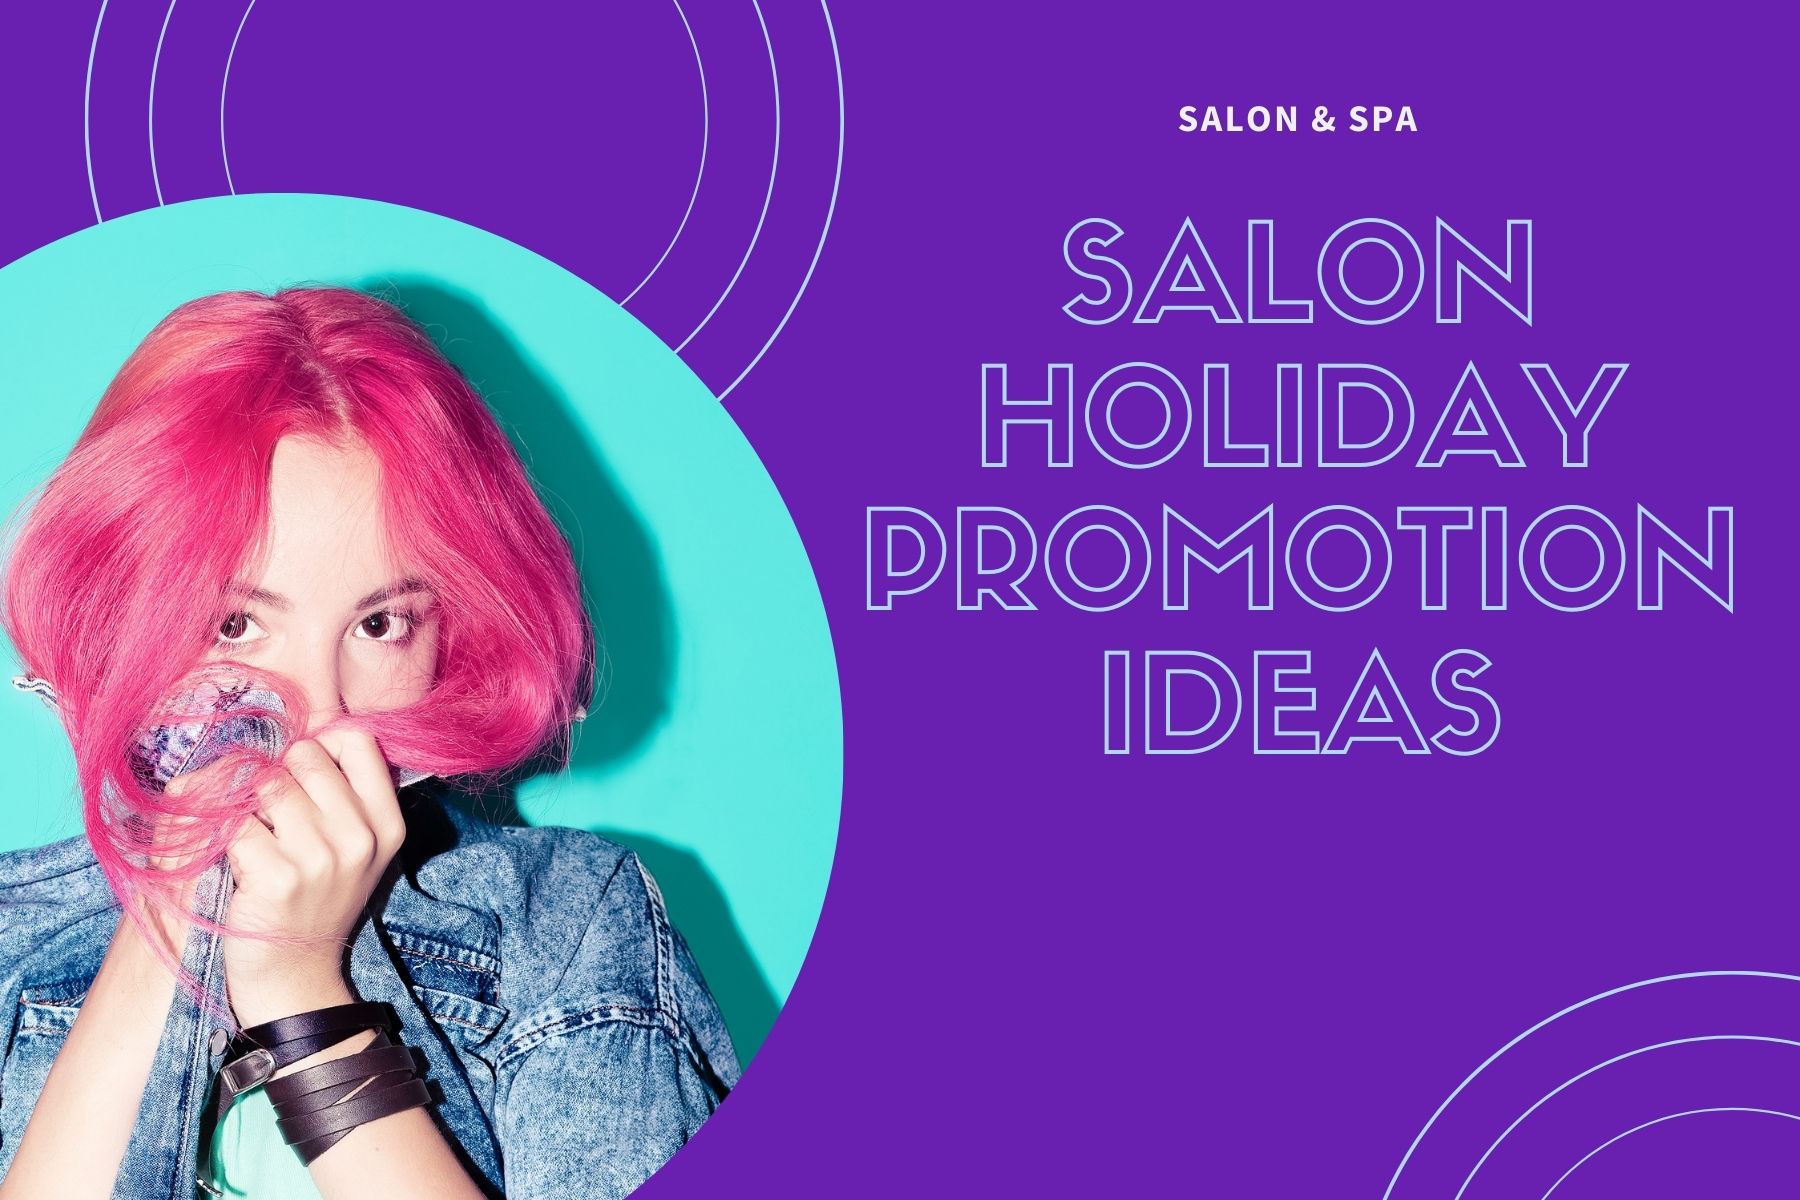 Salon Holiday Promotion Ideas with Ronit & Sarah Cooper - Salon Cadence